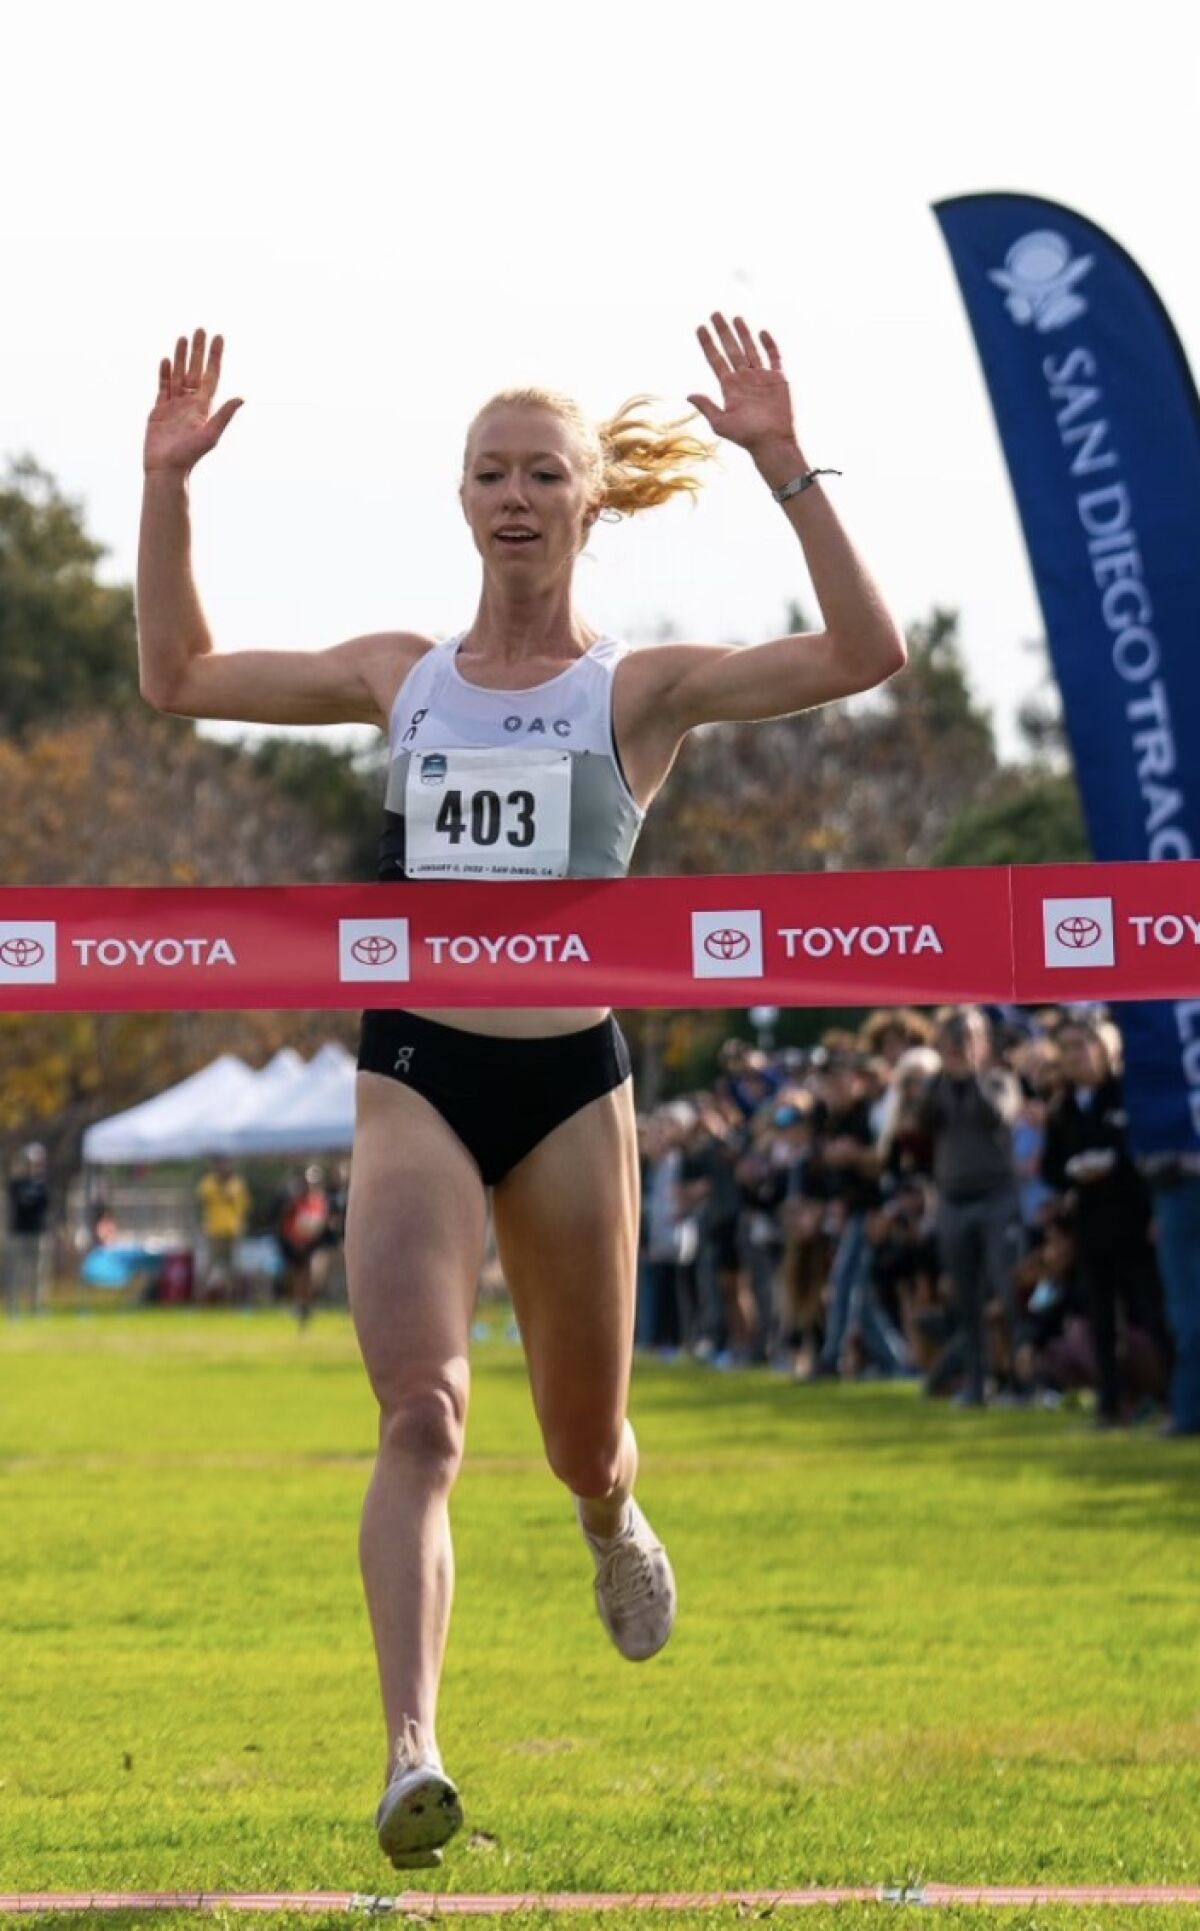 Alicia Monson, who finished 23rd in 10,000 at Tokyo Games, won women’s USATF Cross Country title Saturday at Mission Bay.